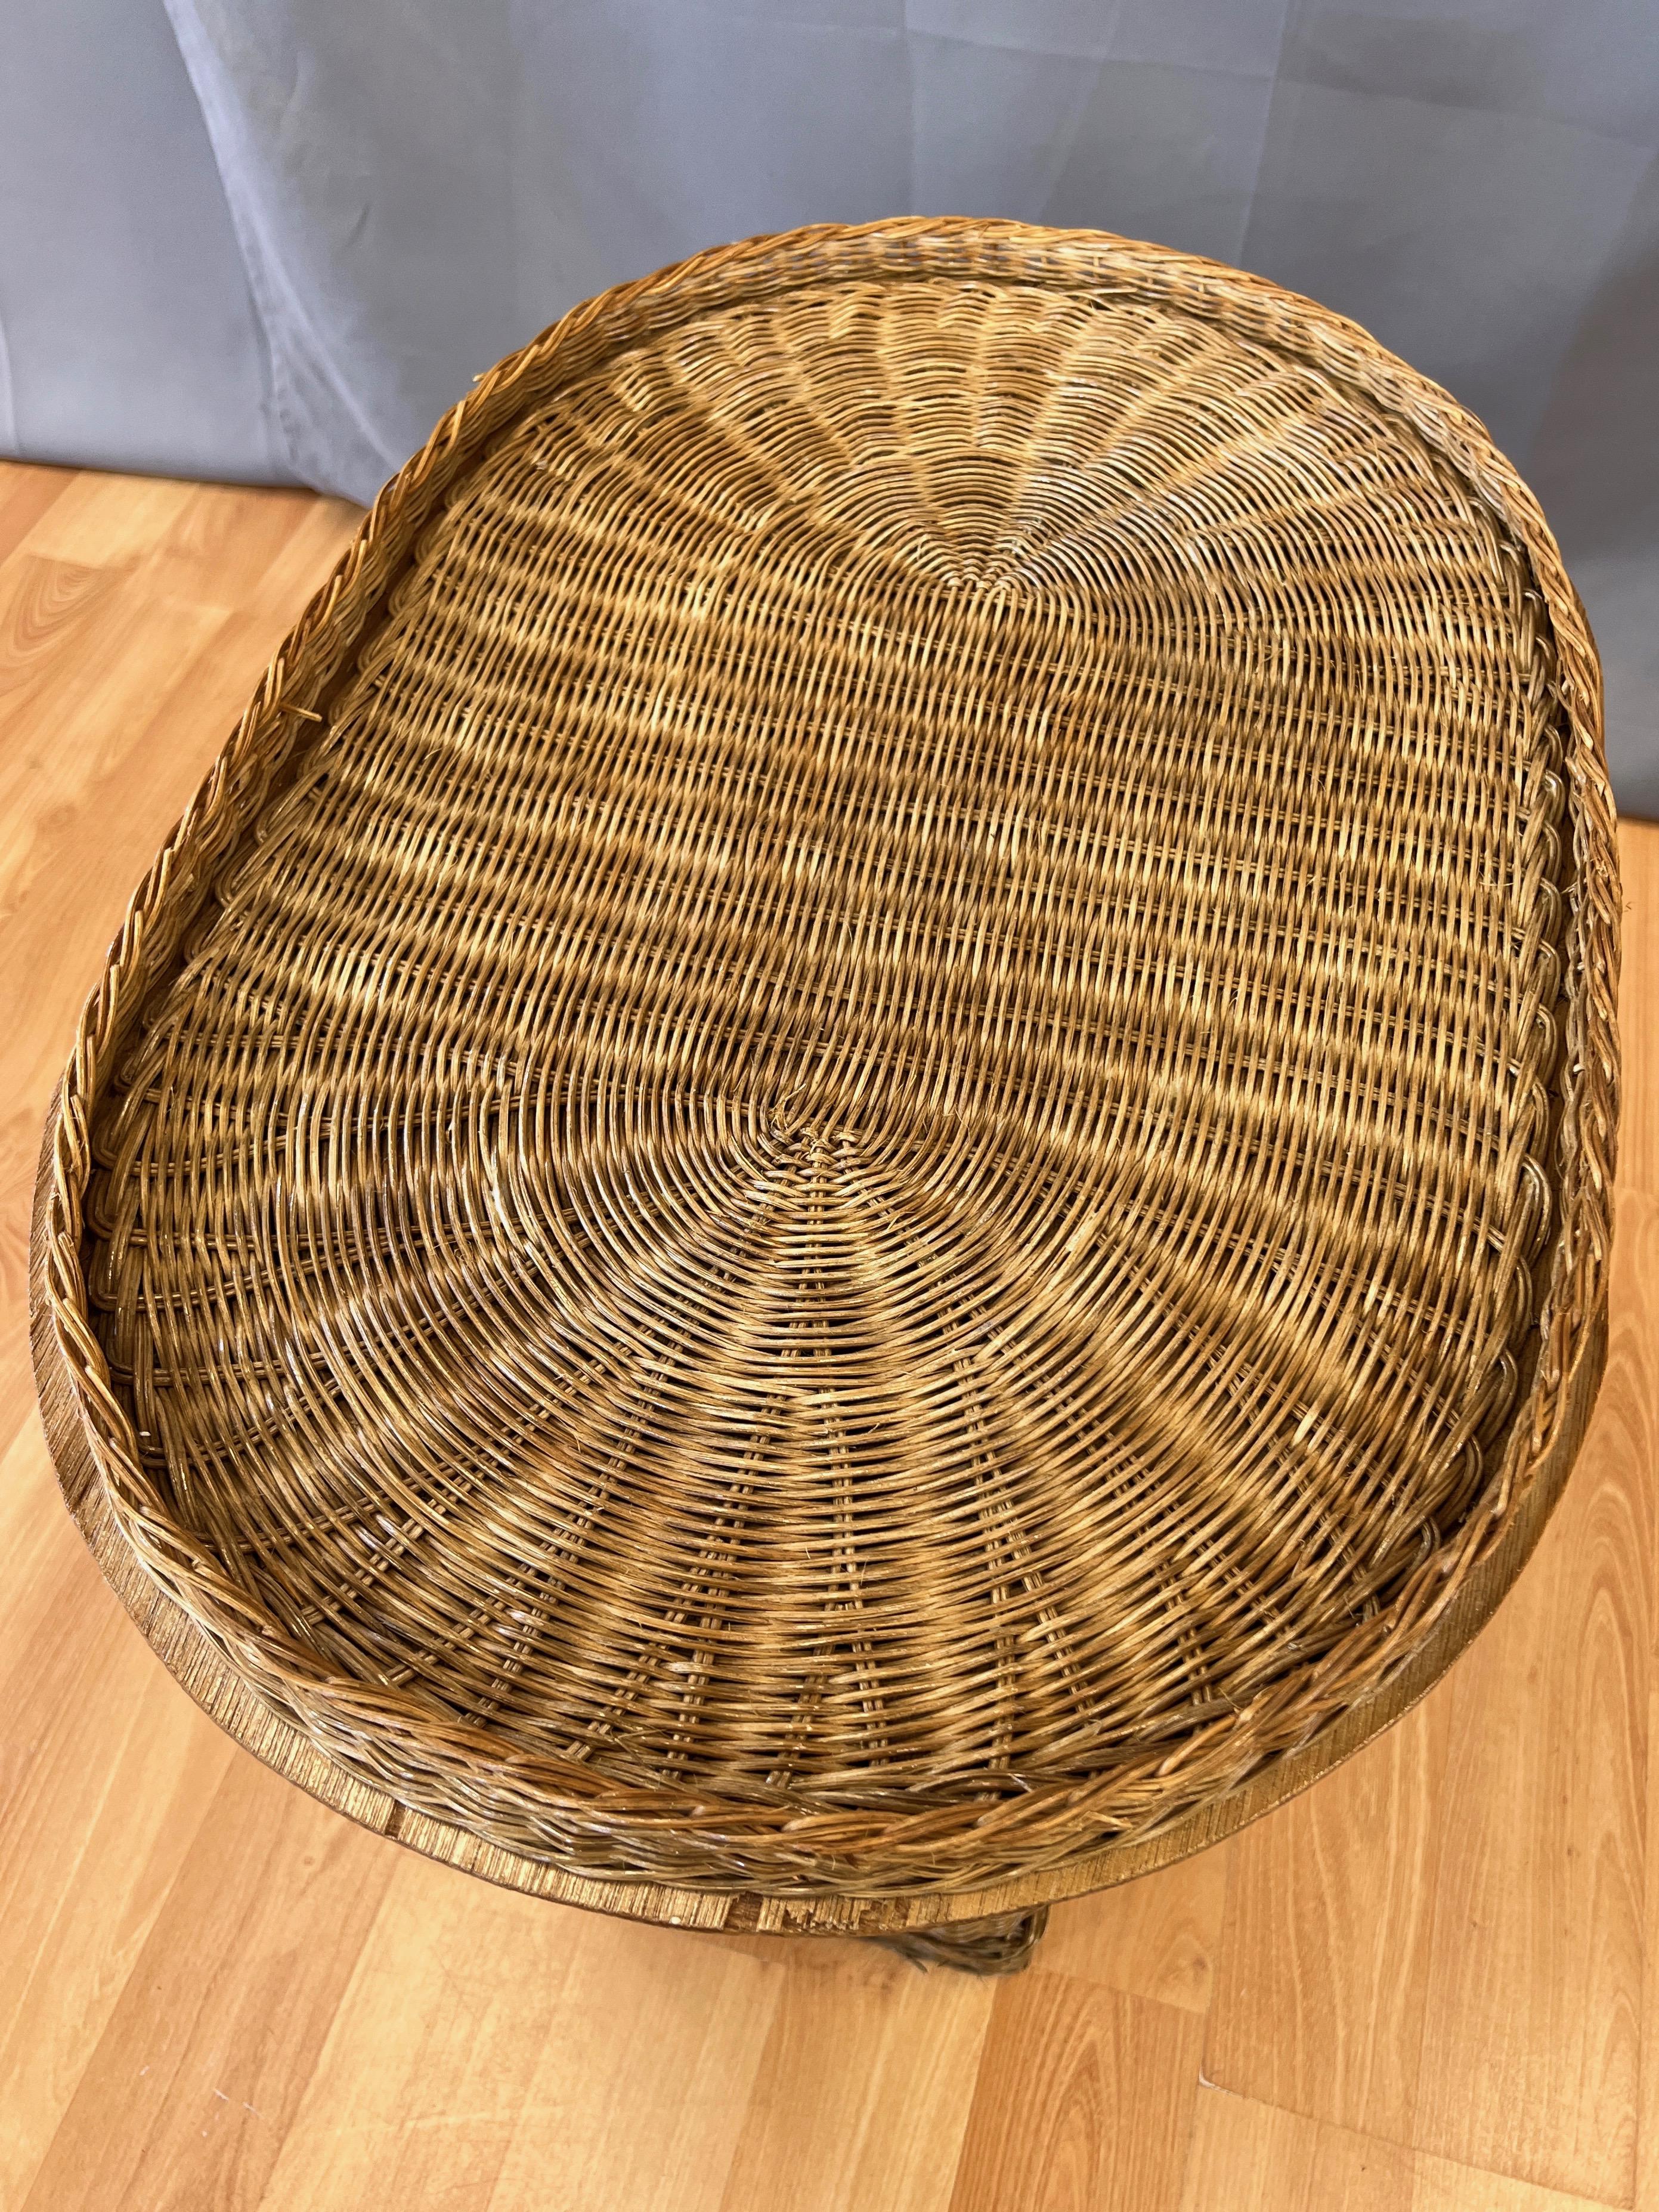 Vintage Boho Chic Natural Wicker & Rattan Elephant Side Table with Tray, 1970s For Sale 2